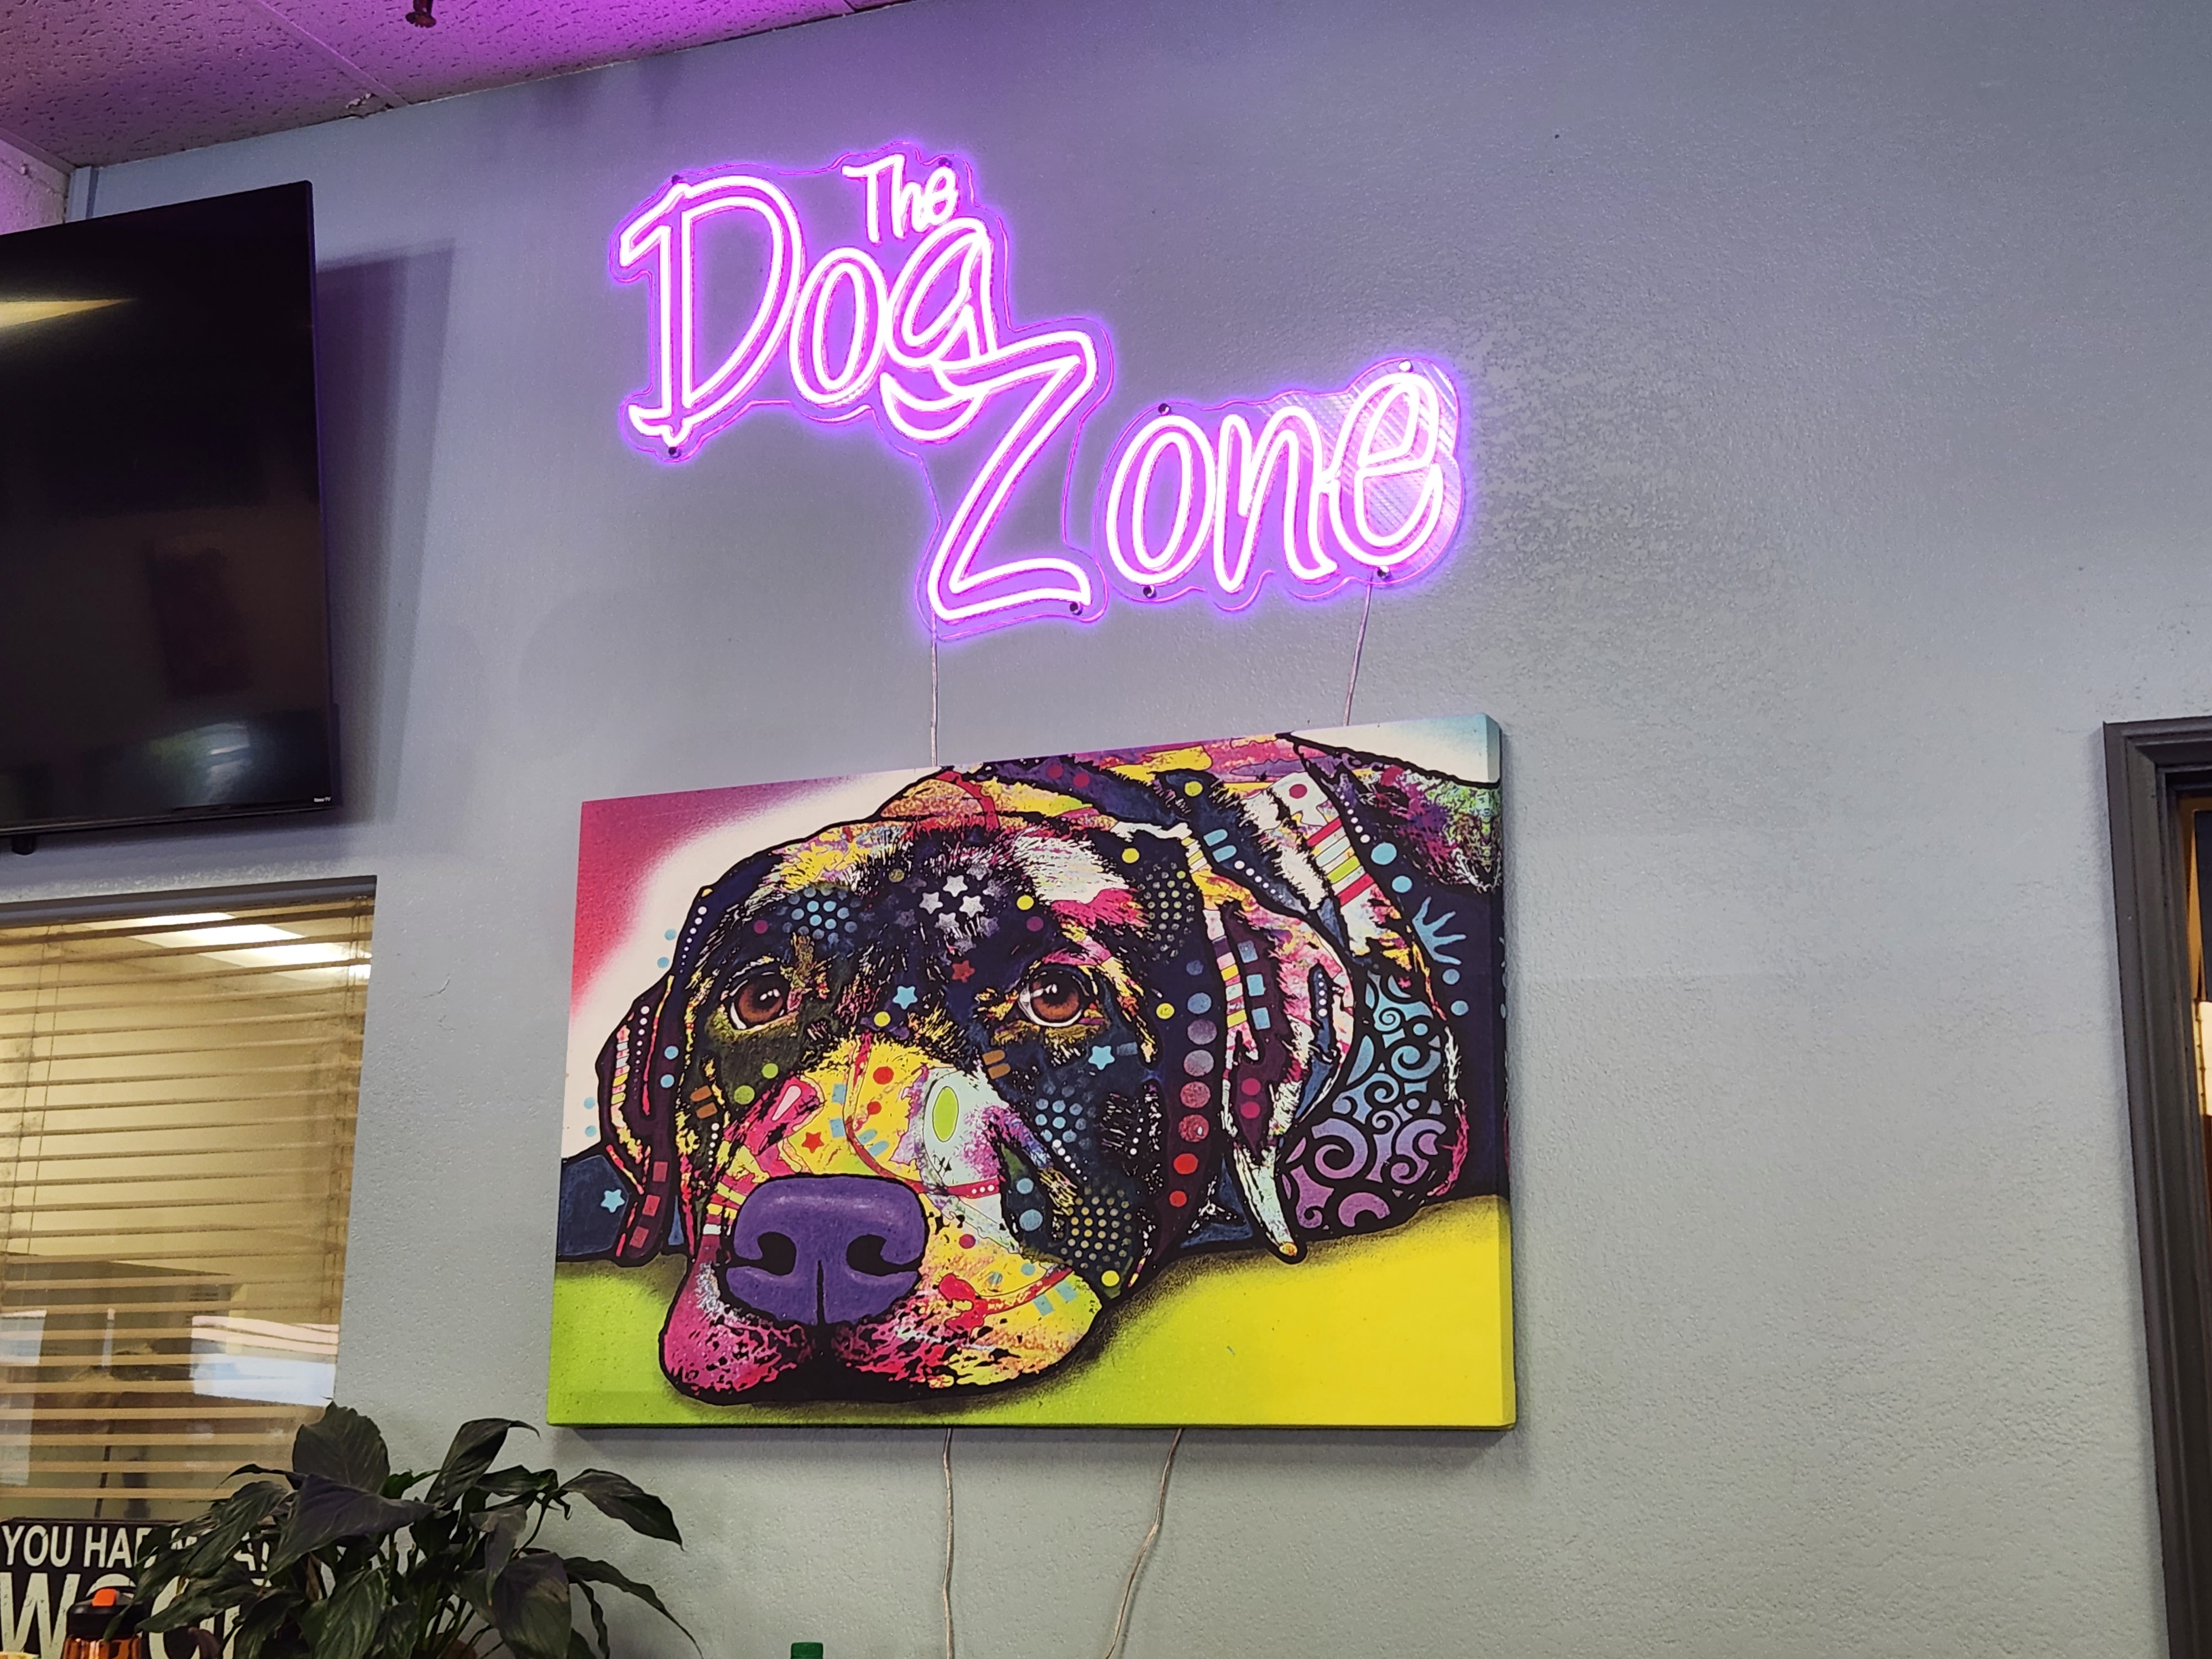 Purple "Dog Zone" neon sign above a psychedelic/abstract painting of a dog's head lying down.